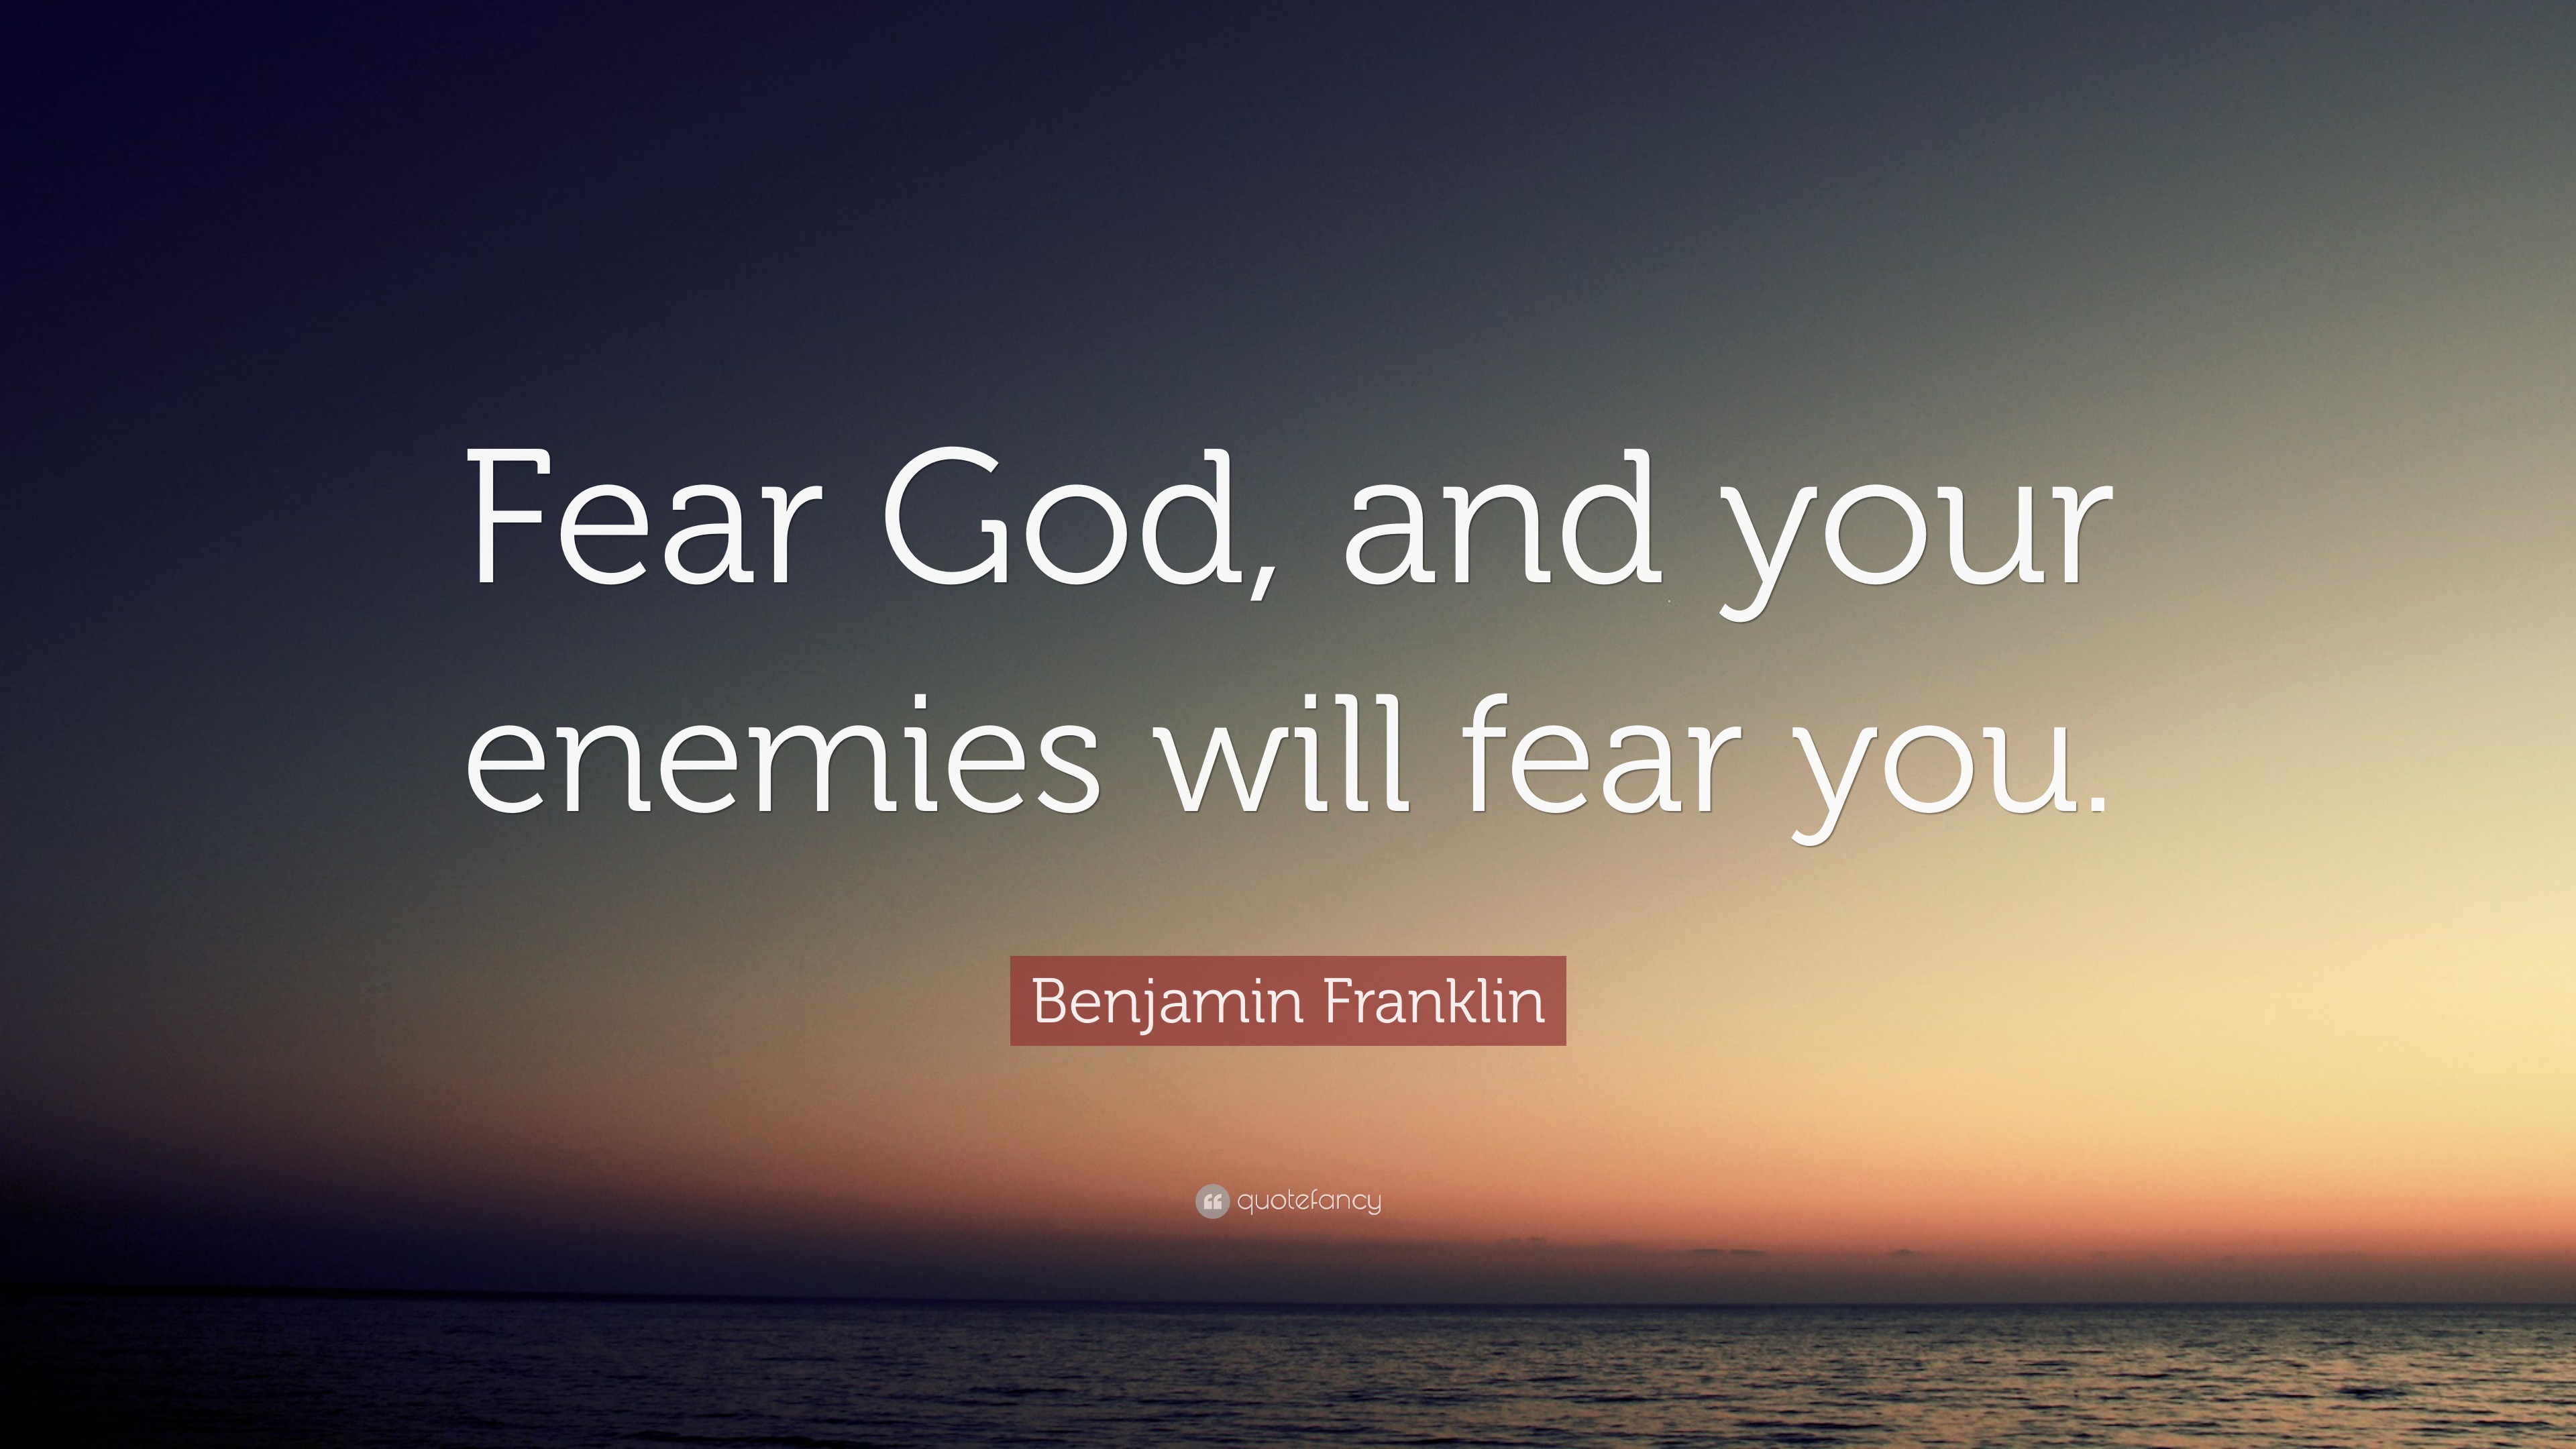 Benjamin Franklin Quote: “Fear God, and your enemies will fear you.”